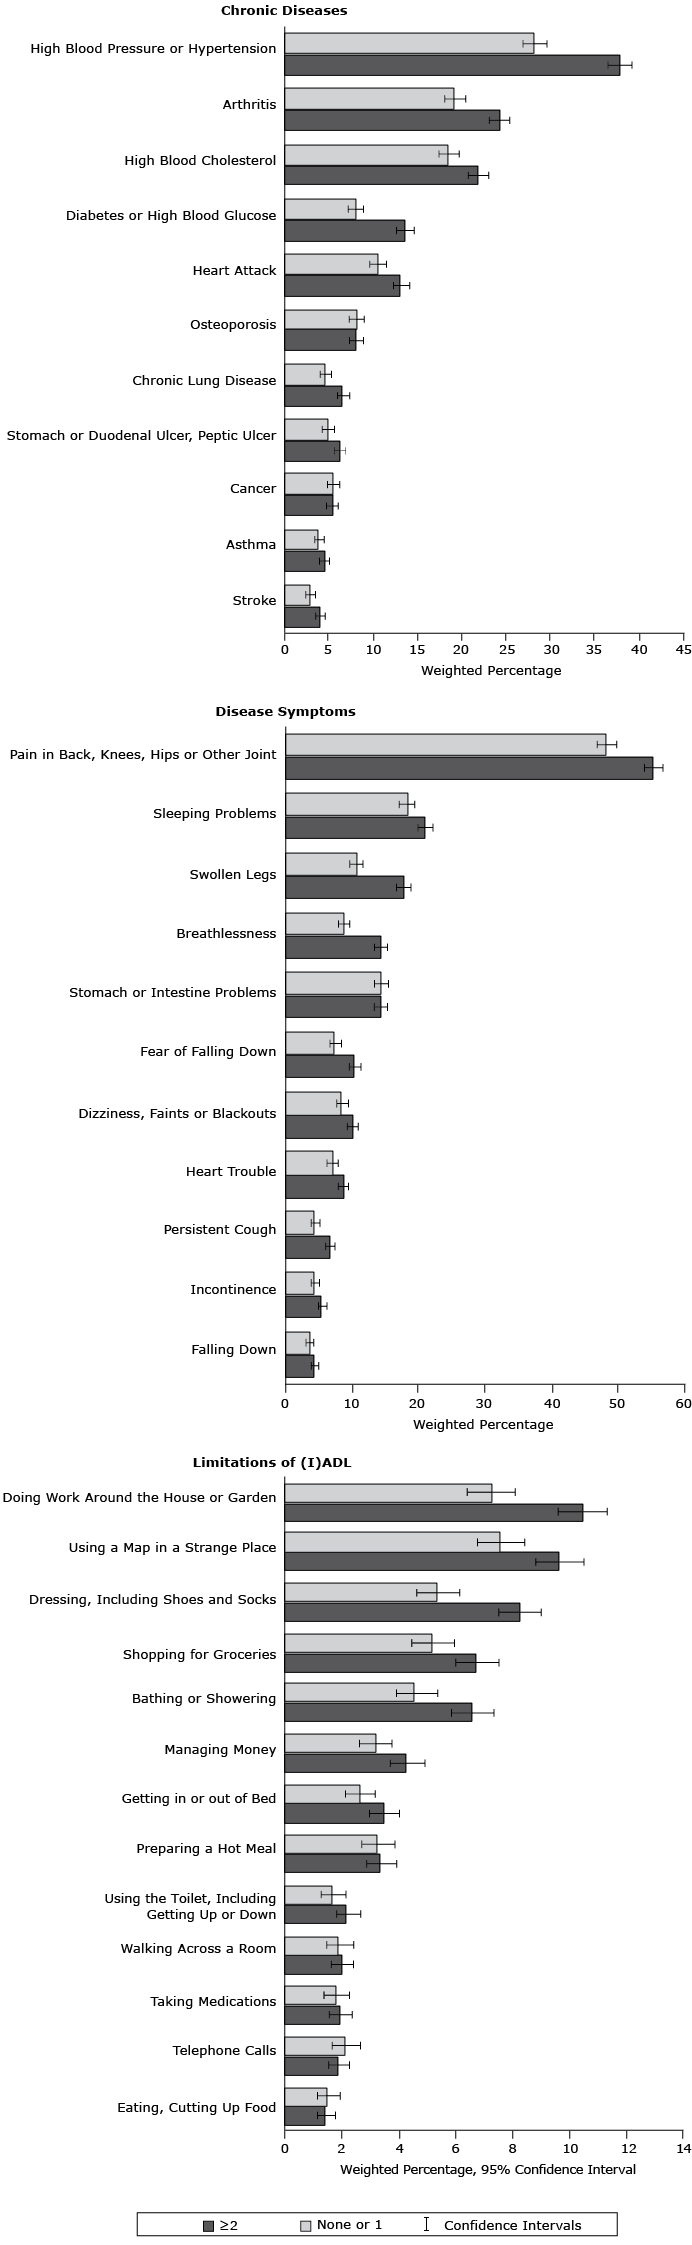 Prevalence of chronic diseases, disease symptoms, and limitations of activities and instrumental activities of daily living according to clustering score of behavioral risk factors. , Survey of Health, Ageing and Retirement in Europe, 2004–2005. Abbreviation: (I)ADL, limitations of activities and instrumental activities of daily living.